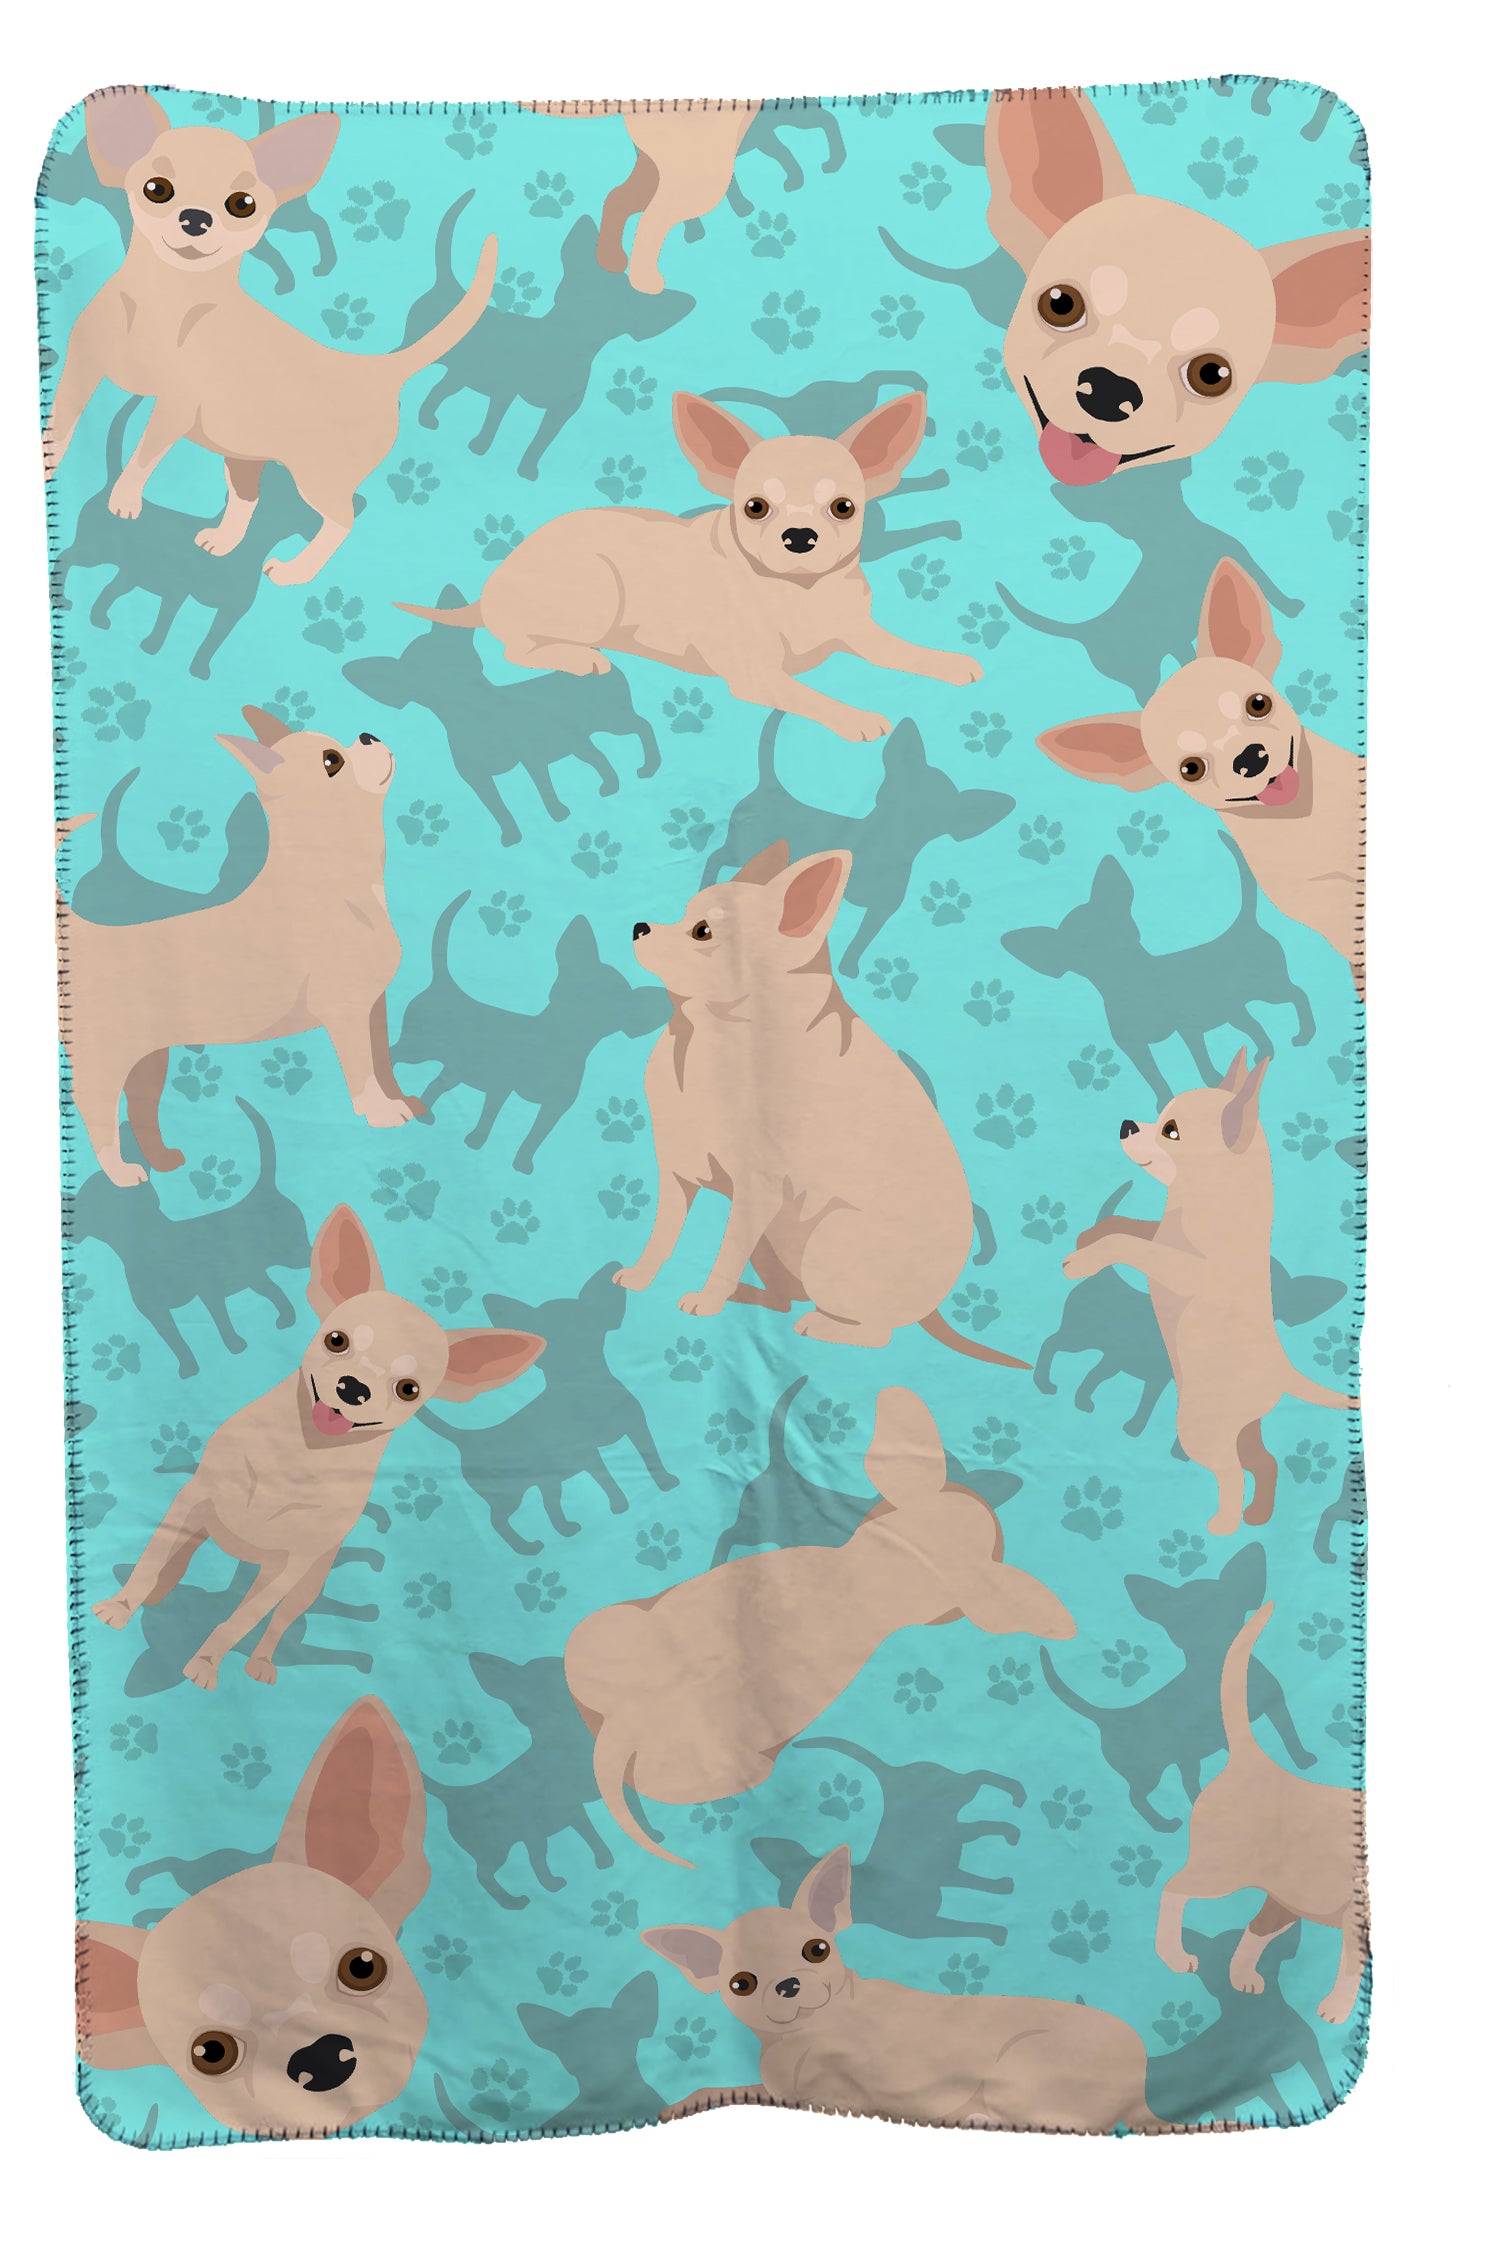 Buy this Chihuahua Soft Travel Blanket with Bag